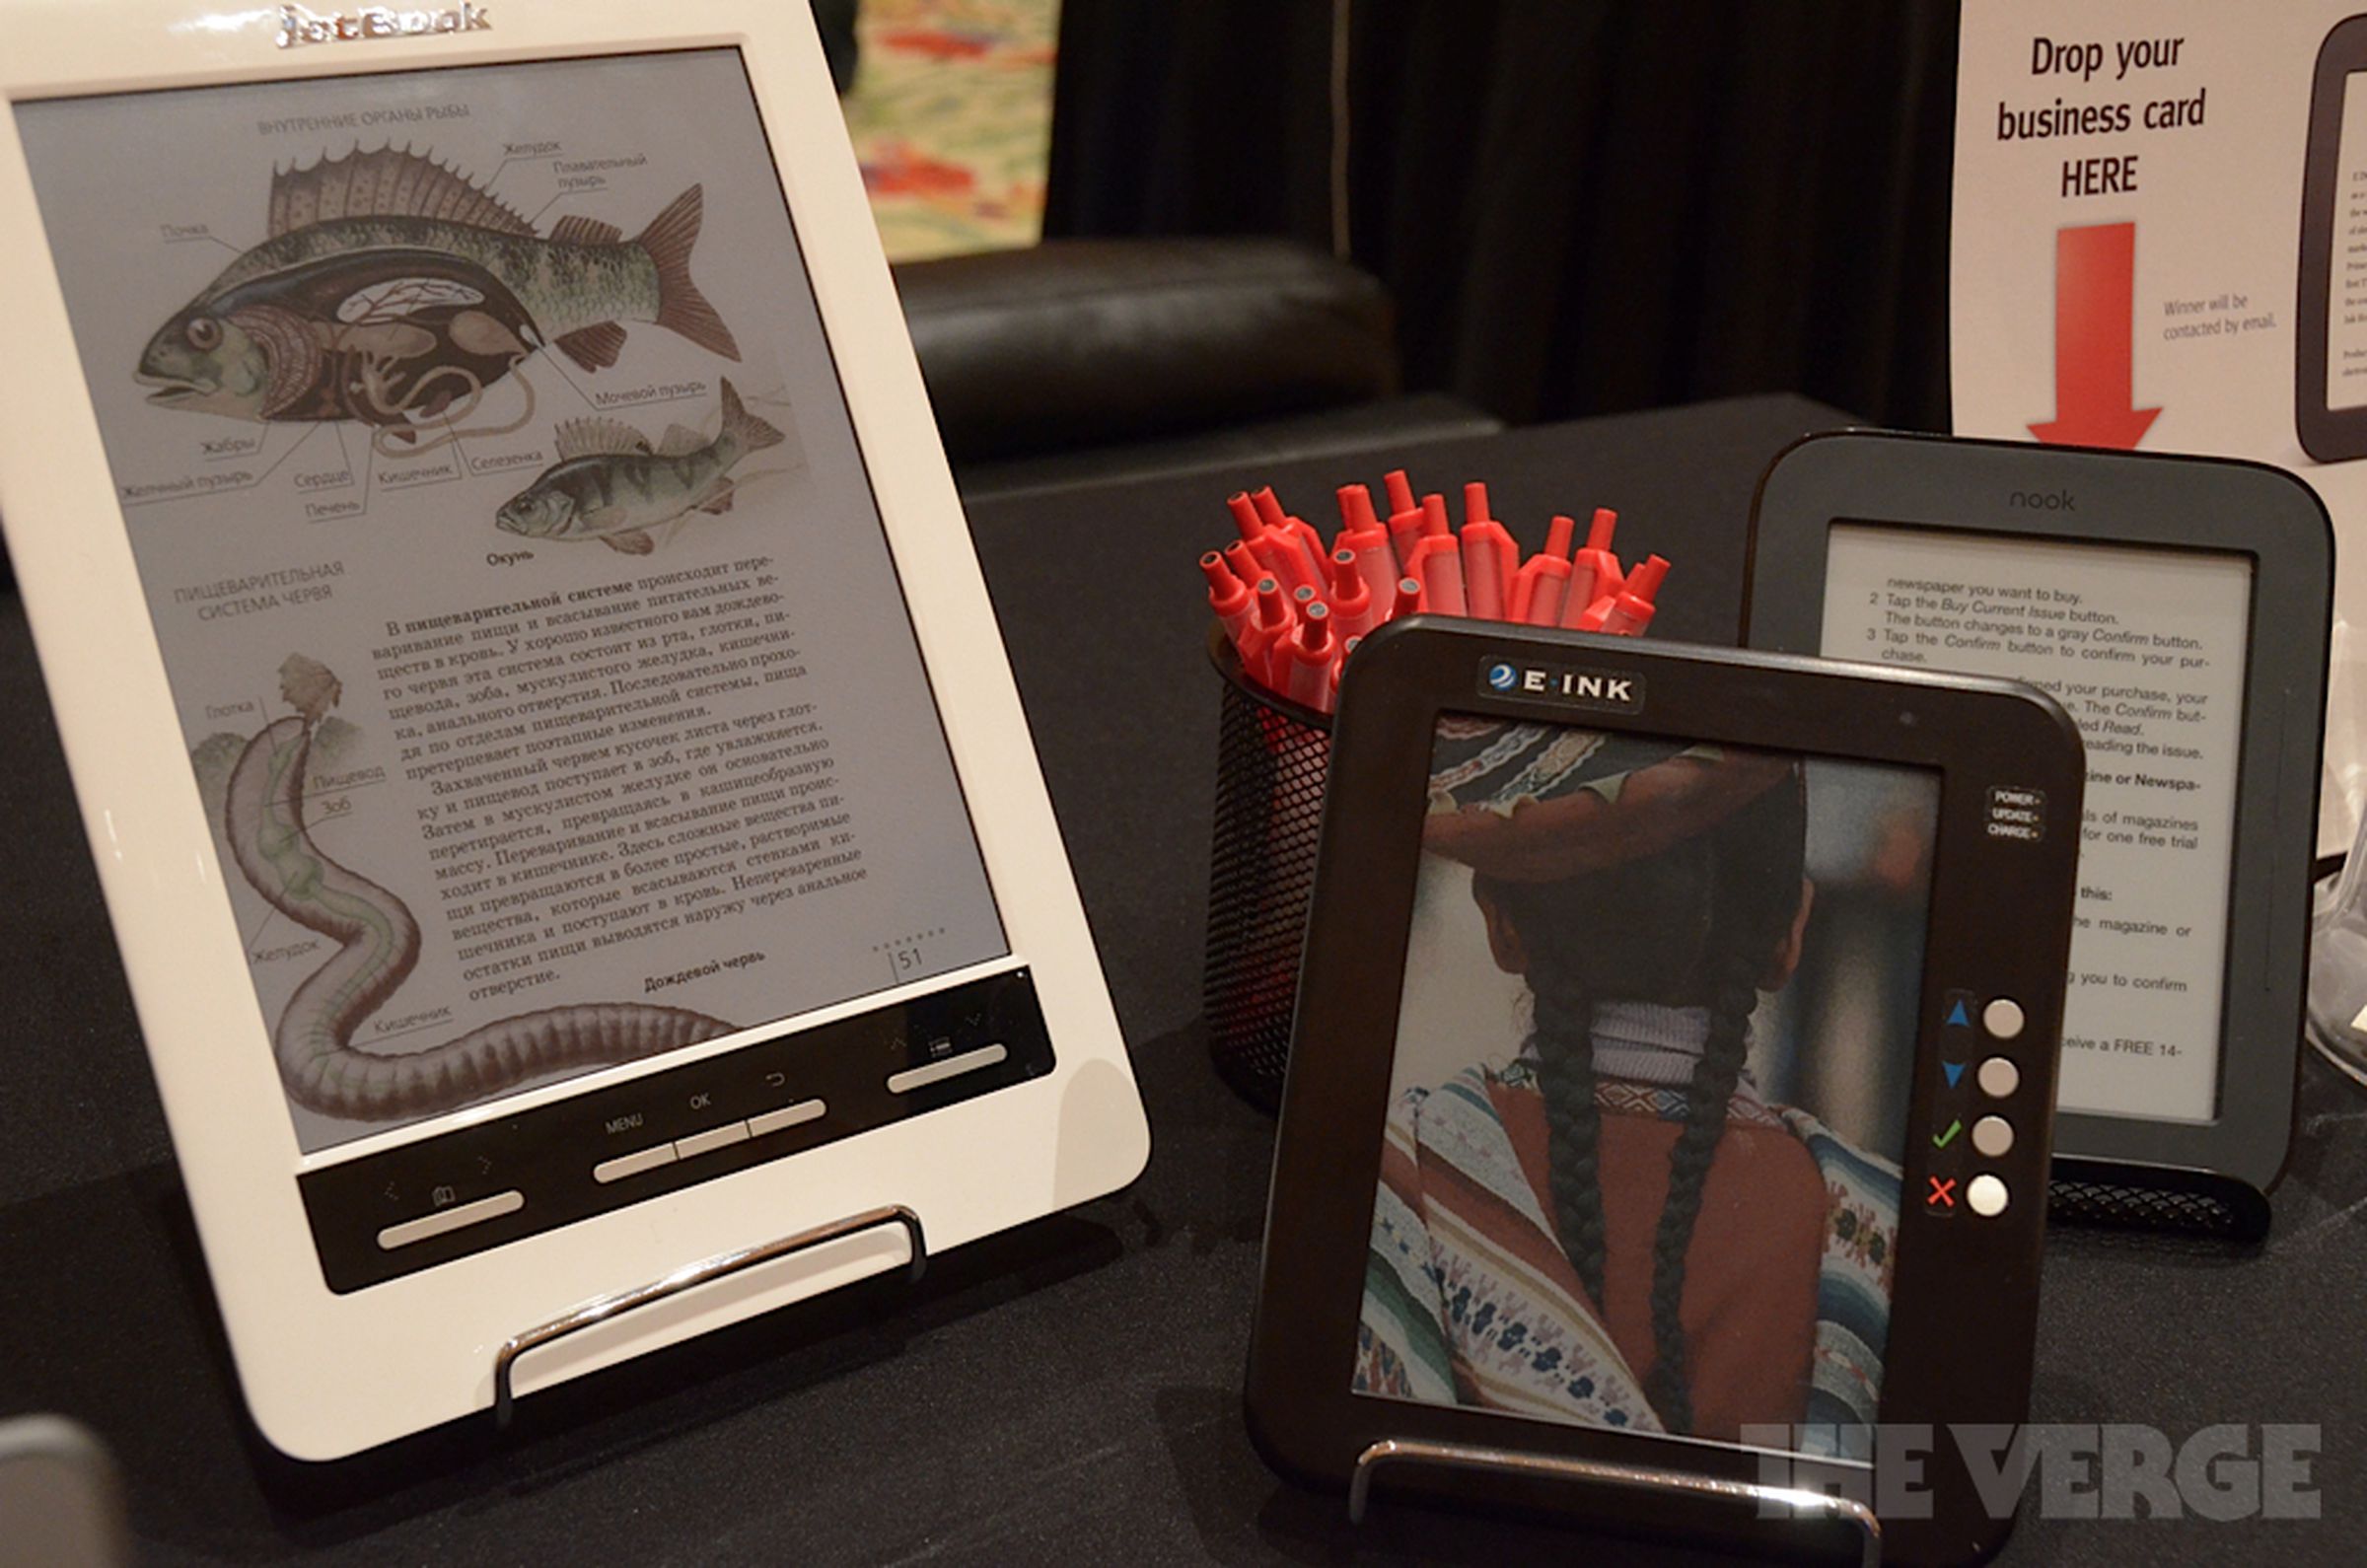 Ectaco Jetbook Color and E Ink prototypes hands-on pictures